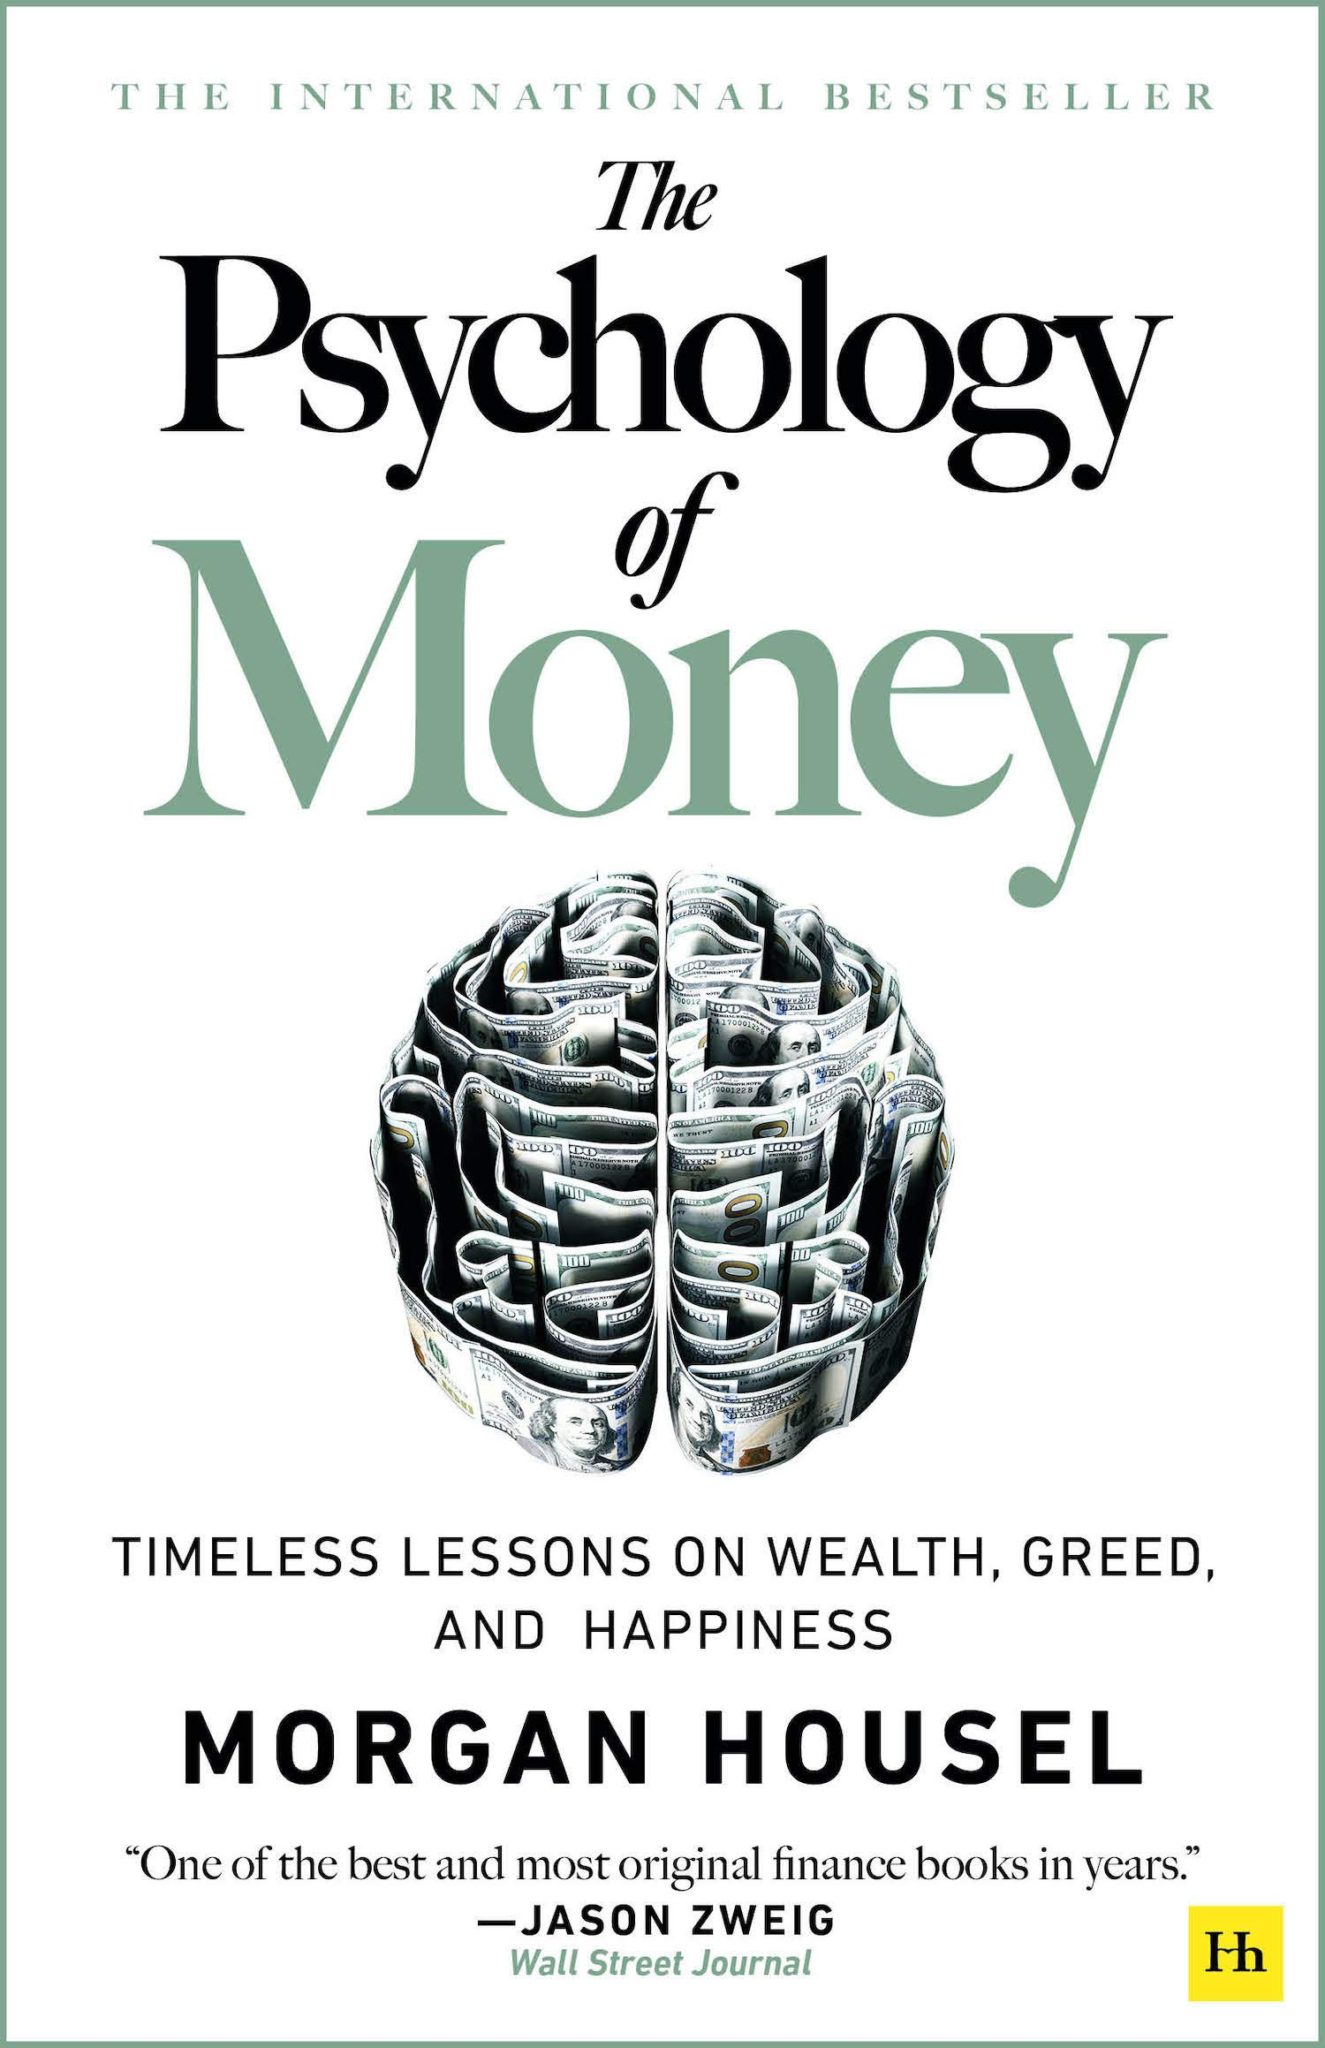 The cover of The Psychology of Money by Morgan Housel